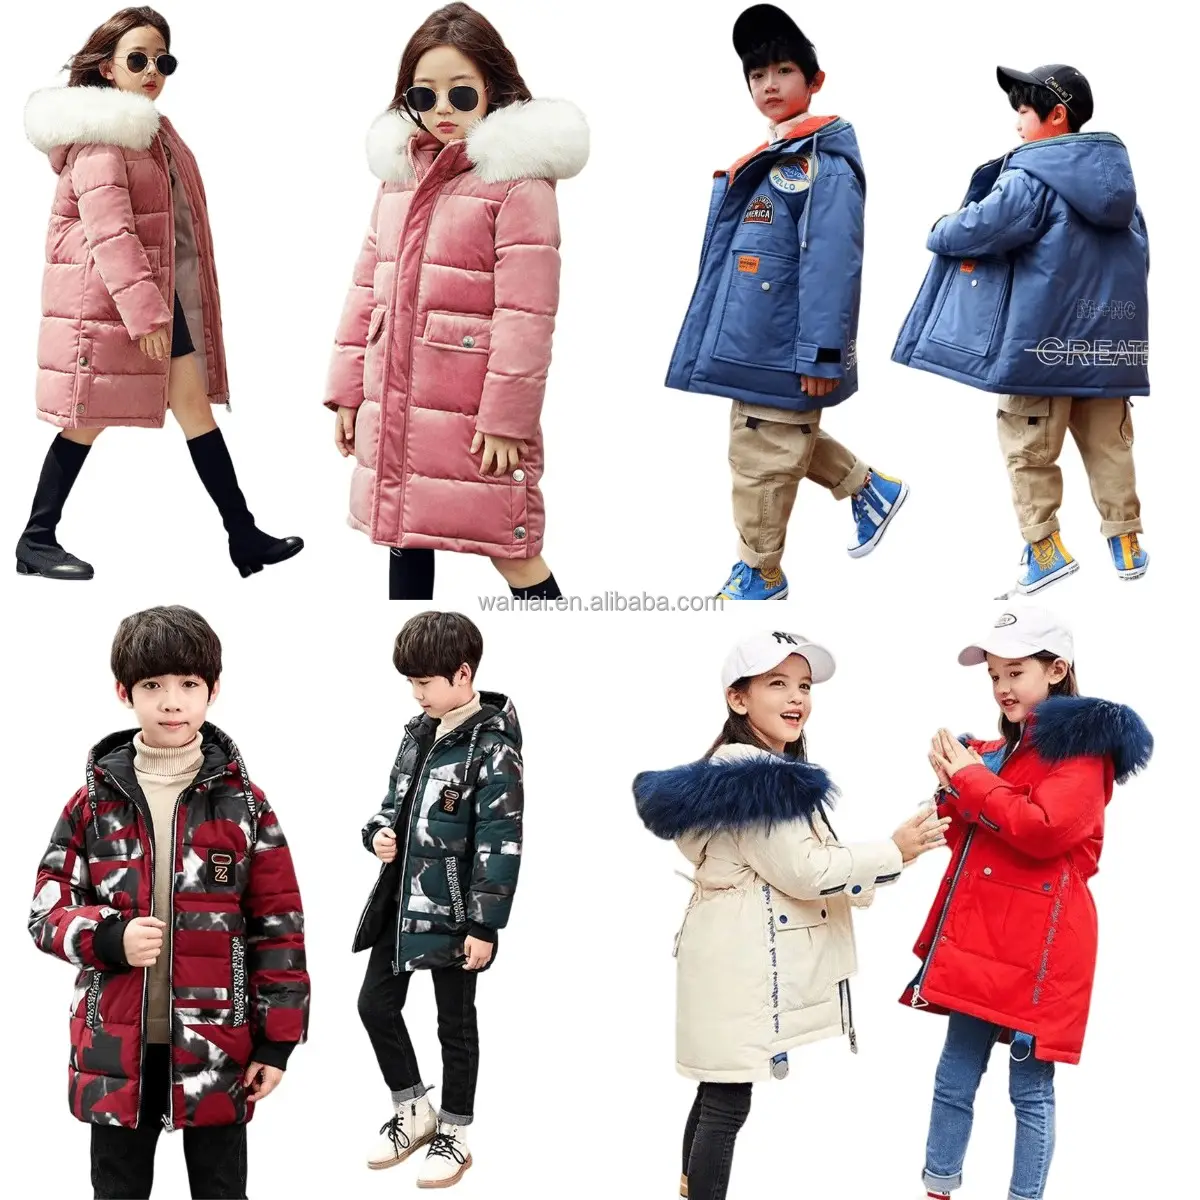 Hot Sales Children Cotton-padded Parka Coats with Hoodies Thicken Warm Long Kids winter Jackets